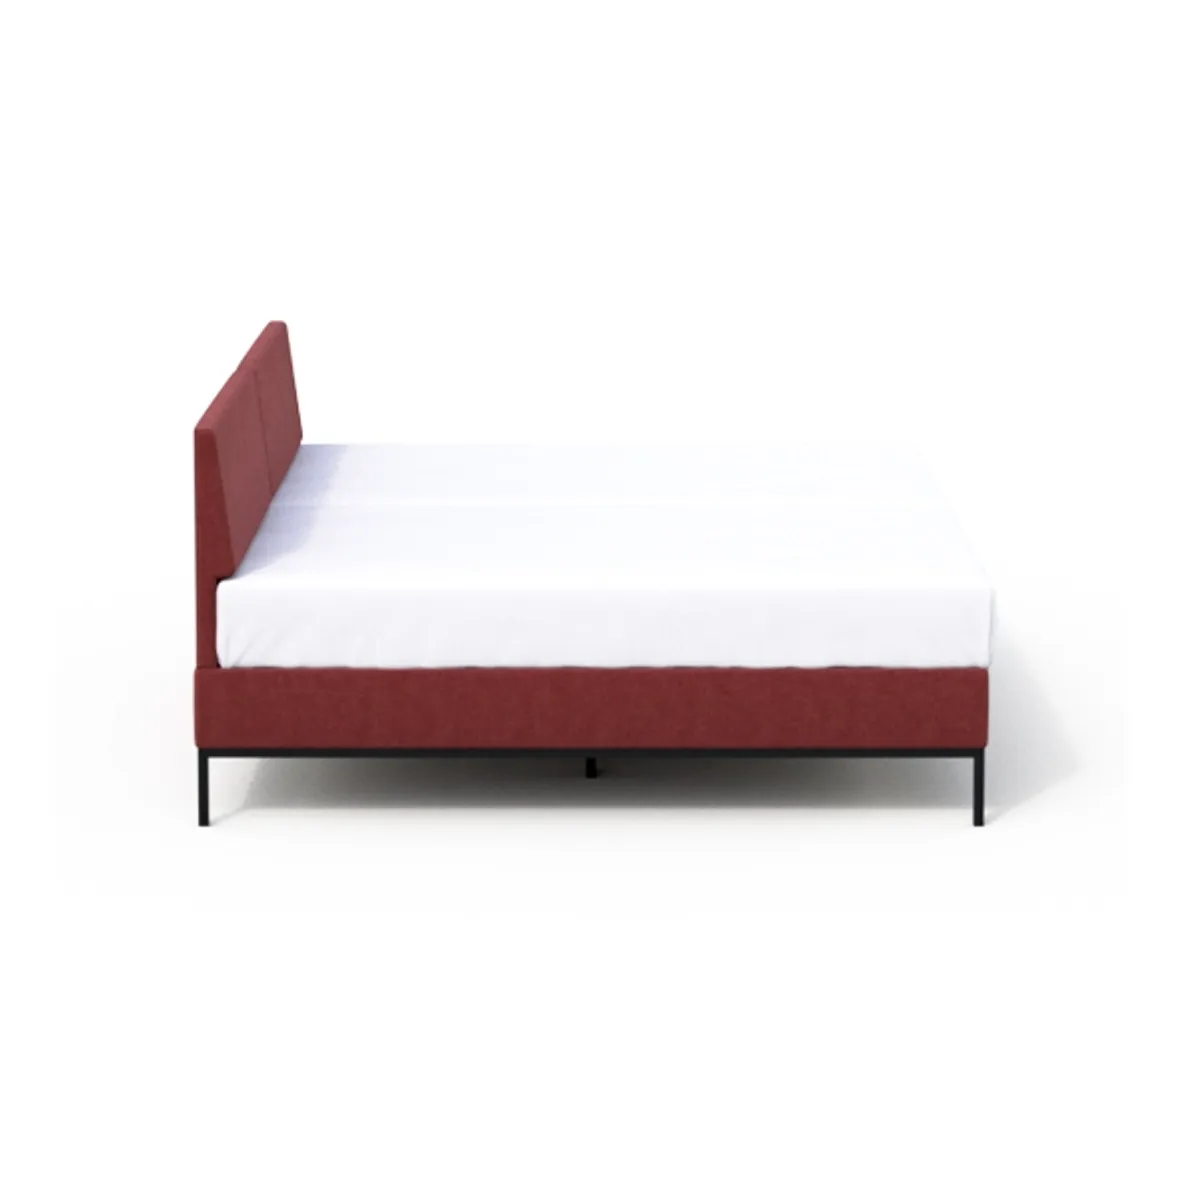 Single bed Inside Out Contracts4